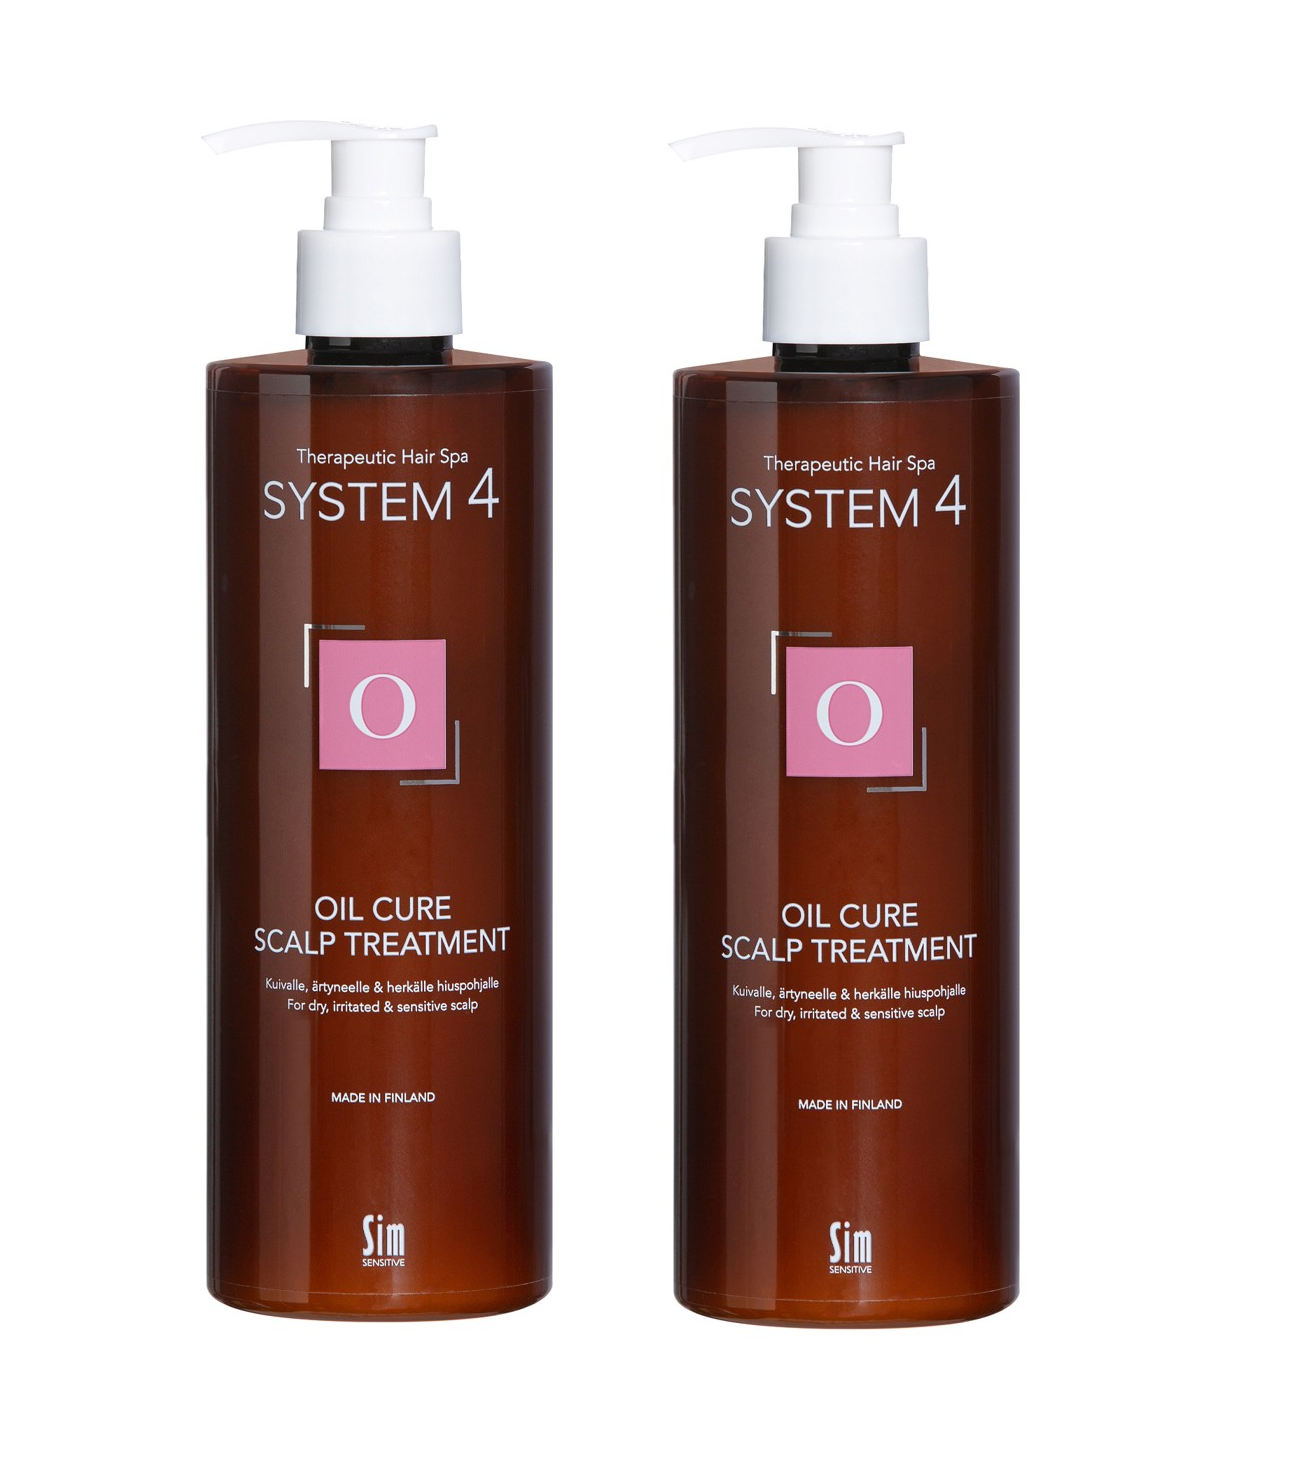 System 4 - Nr. O Oli Cure Hair Mask 500 ml - Duo Pack